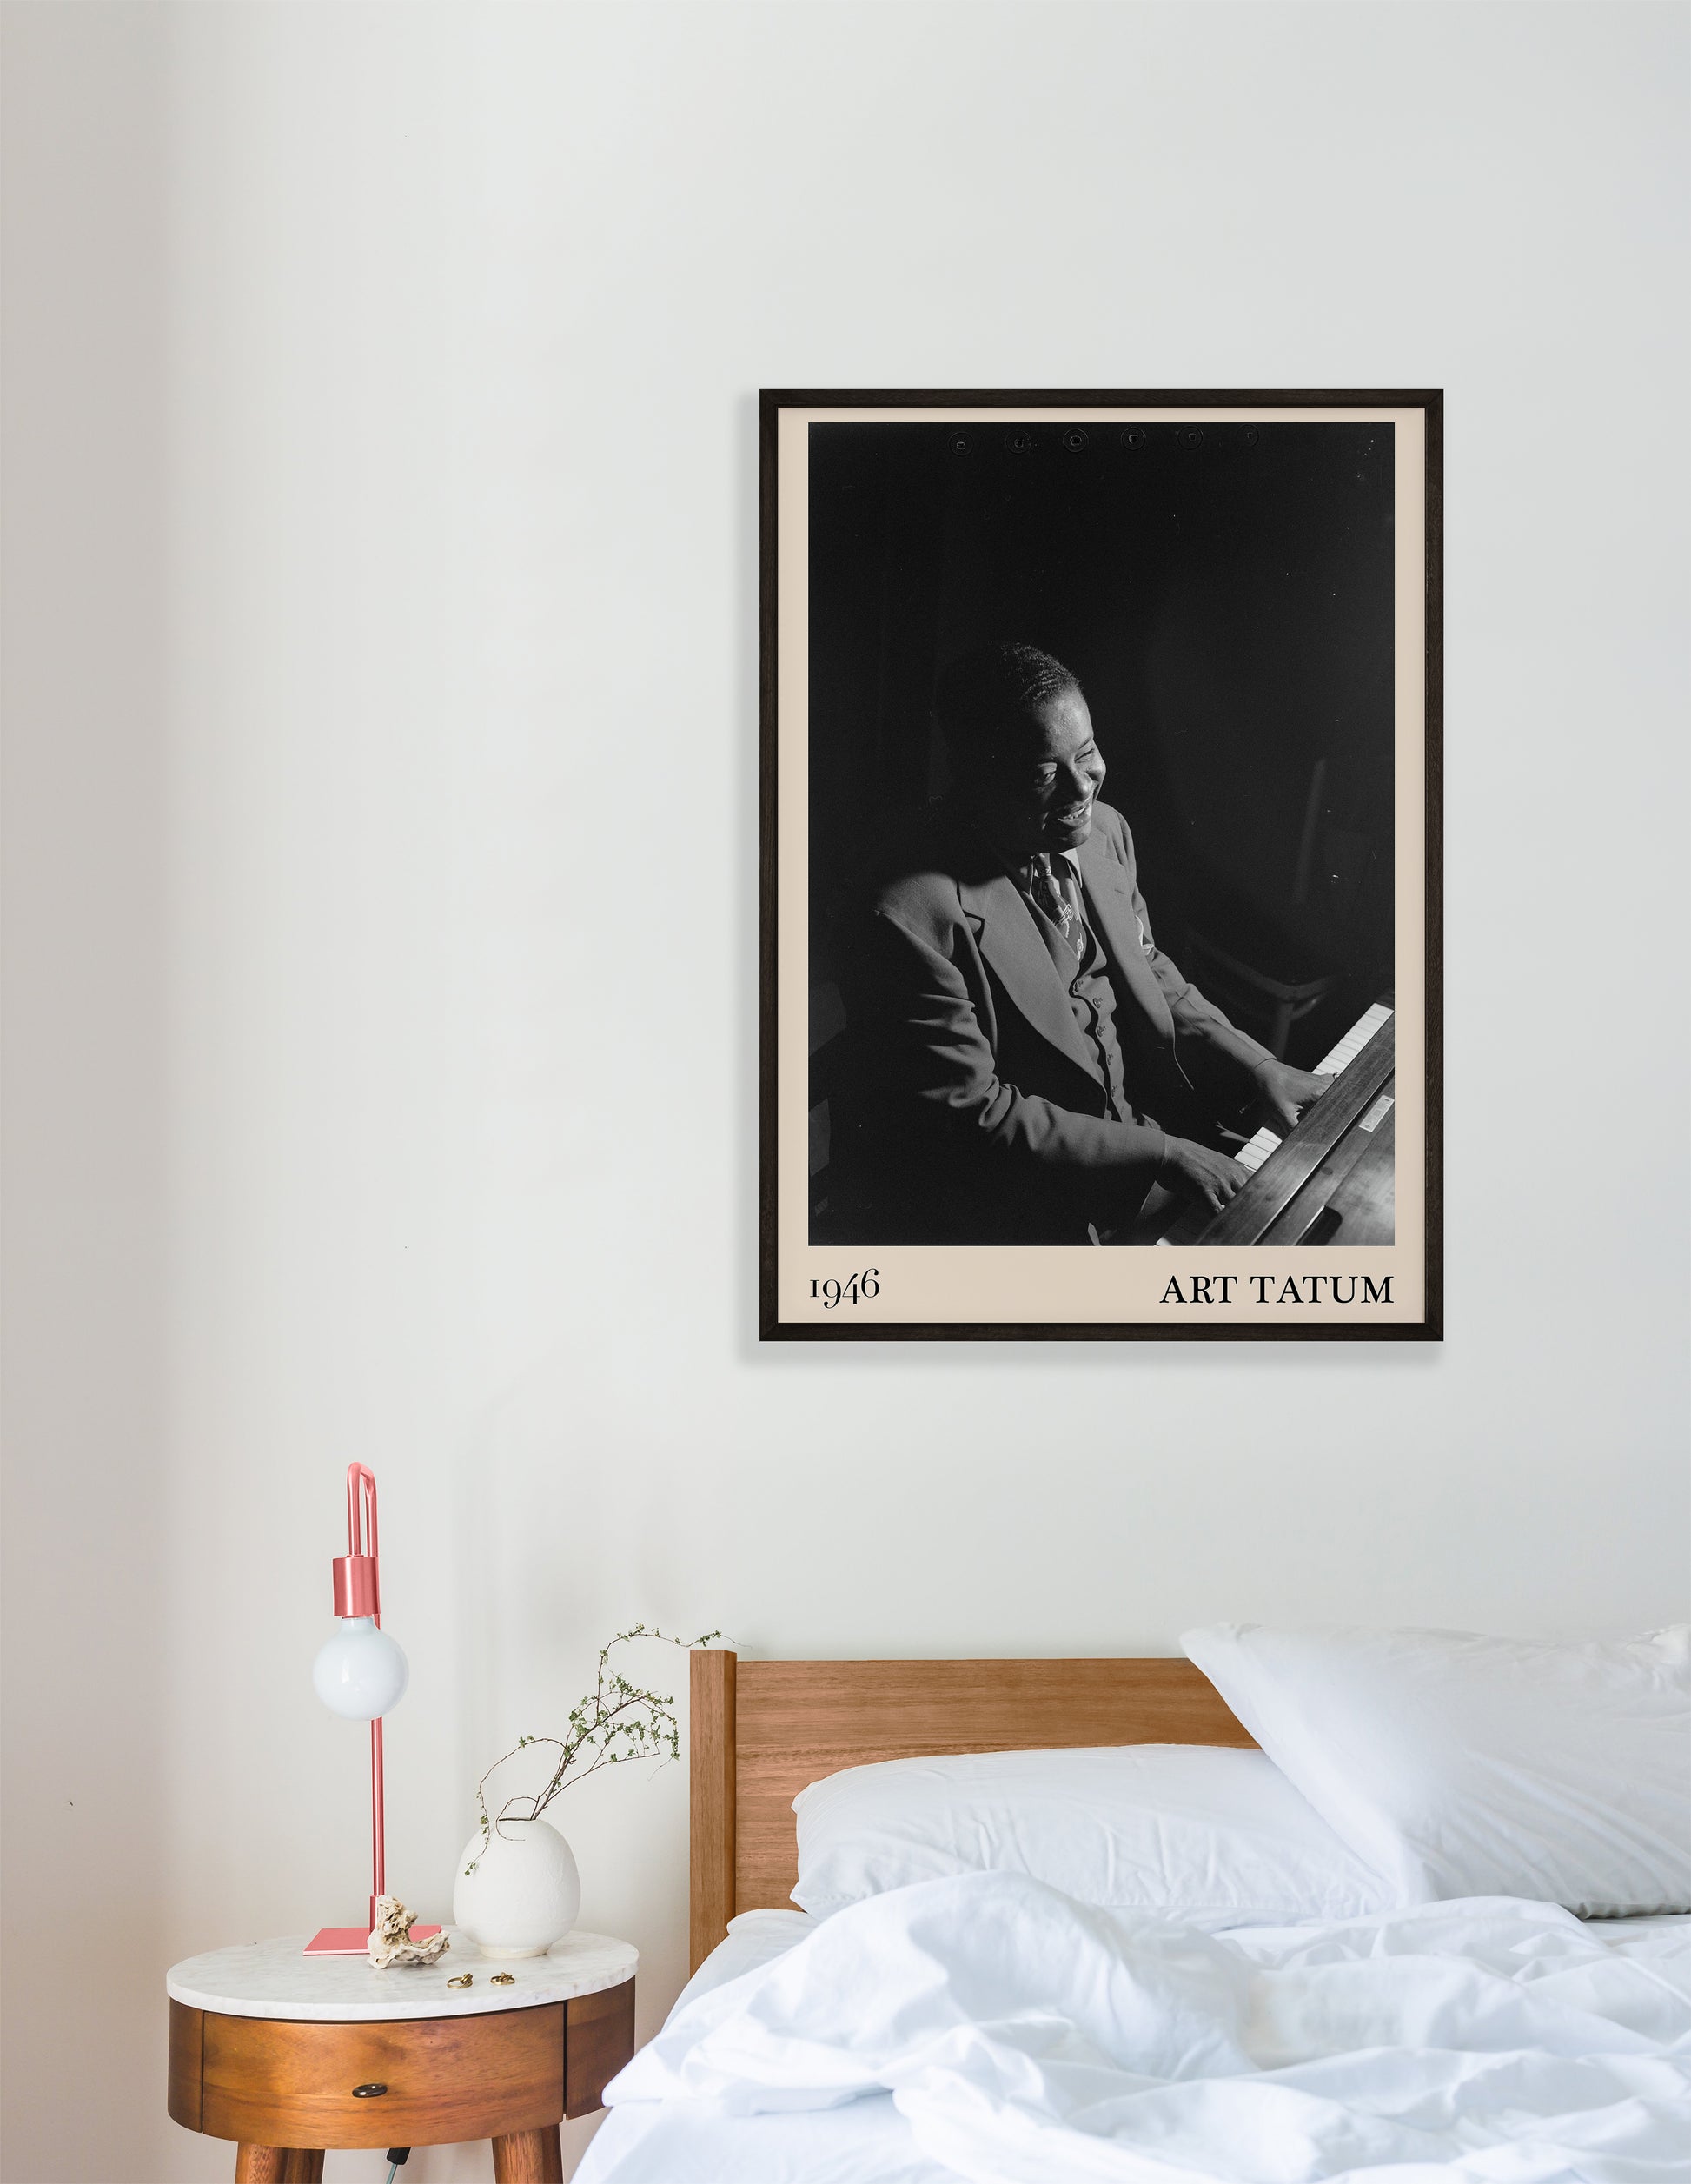 1946 photograph of Art Tatum crafted into a cool framed jazz print. The poster has an off-white border and a thin black frame. The poster is hanging on a white bedroom wall